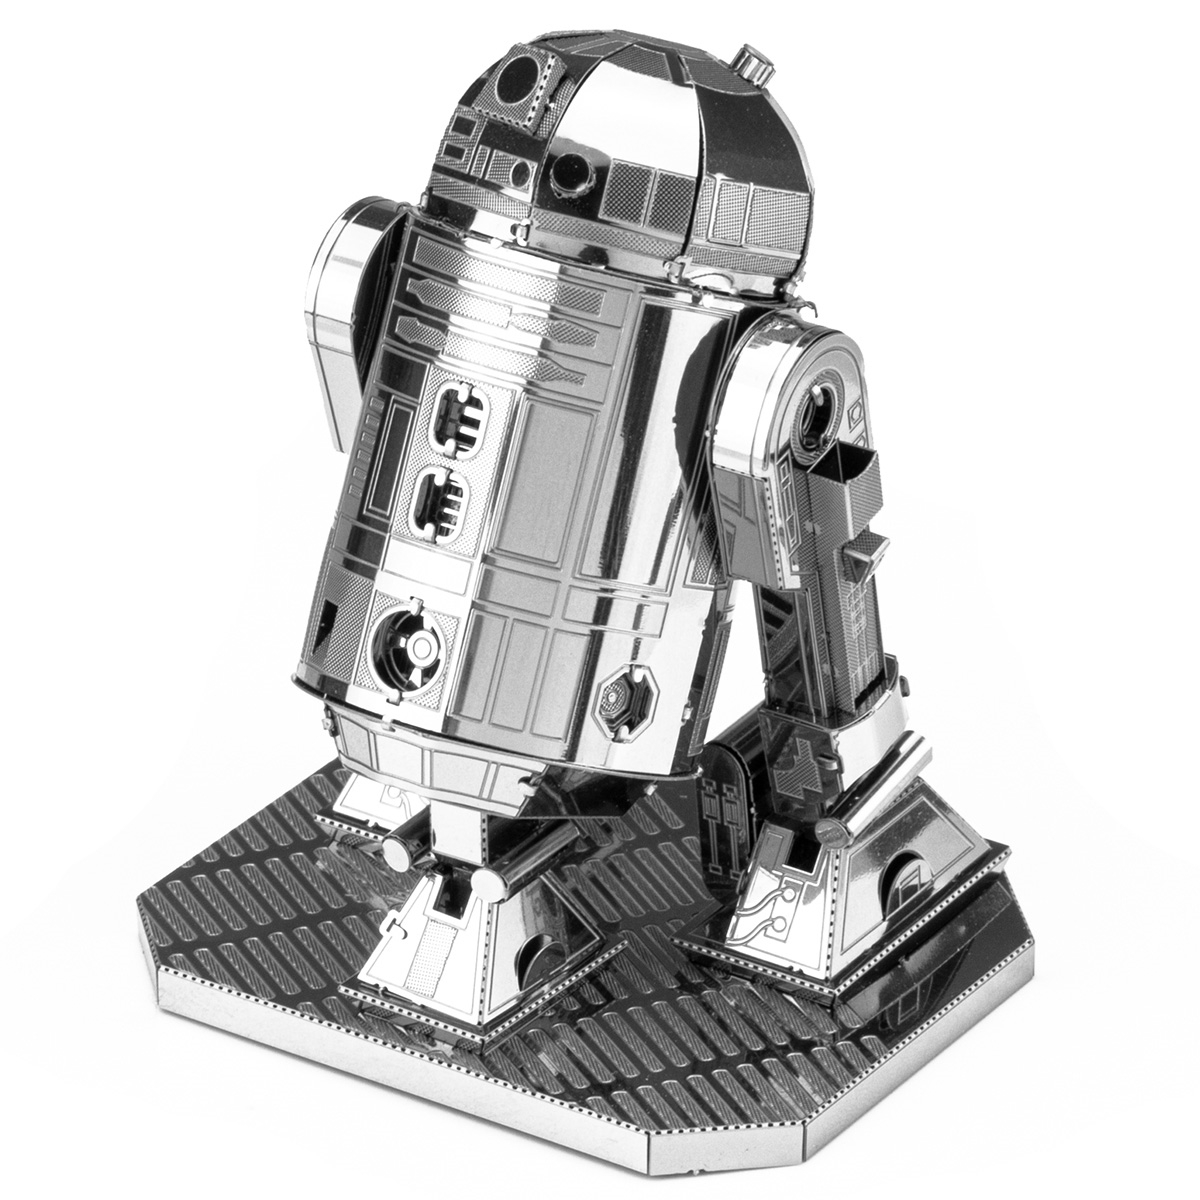 Fascinations Star Wars Imperial Destroyer Droid 3D Metal Earth Model Kit MMS252 